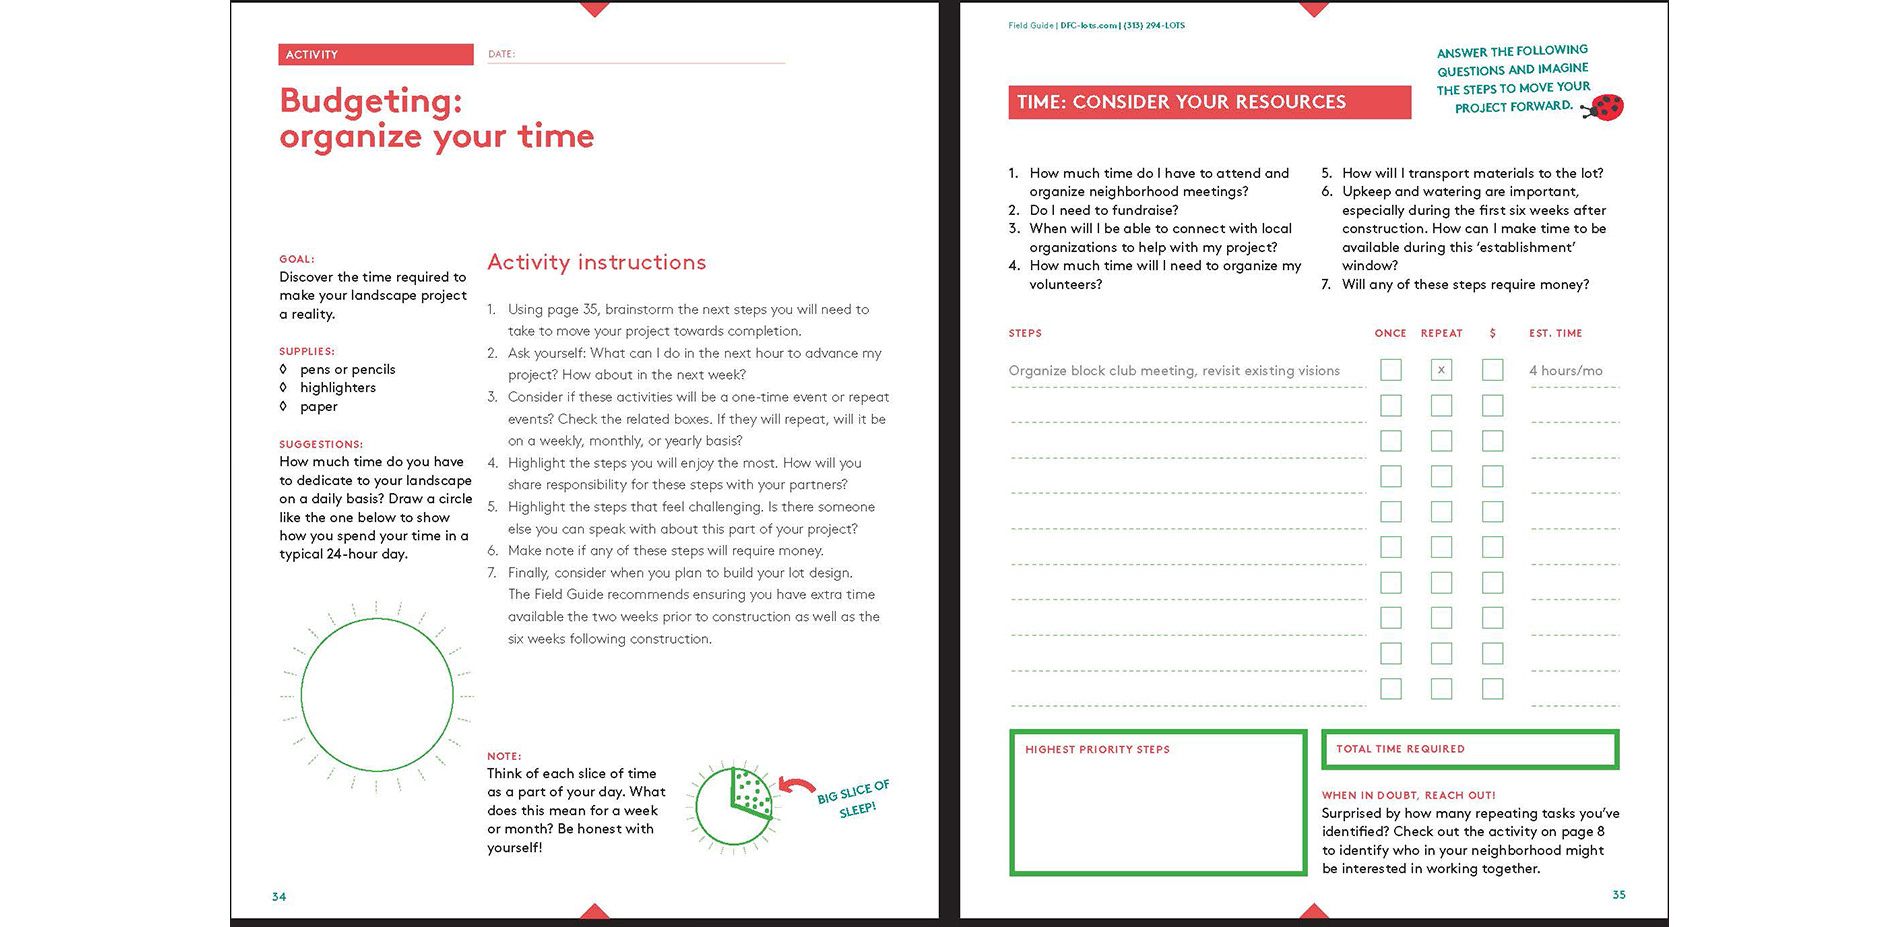 Sample of the Get Organized section of the Workbook